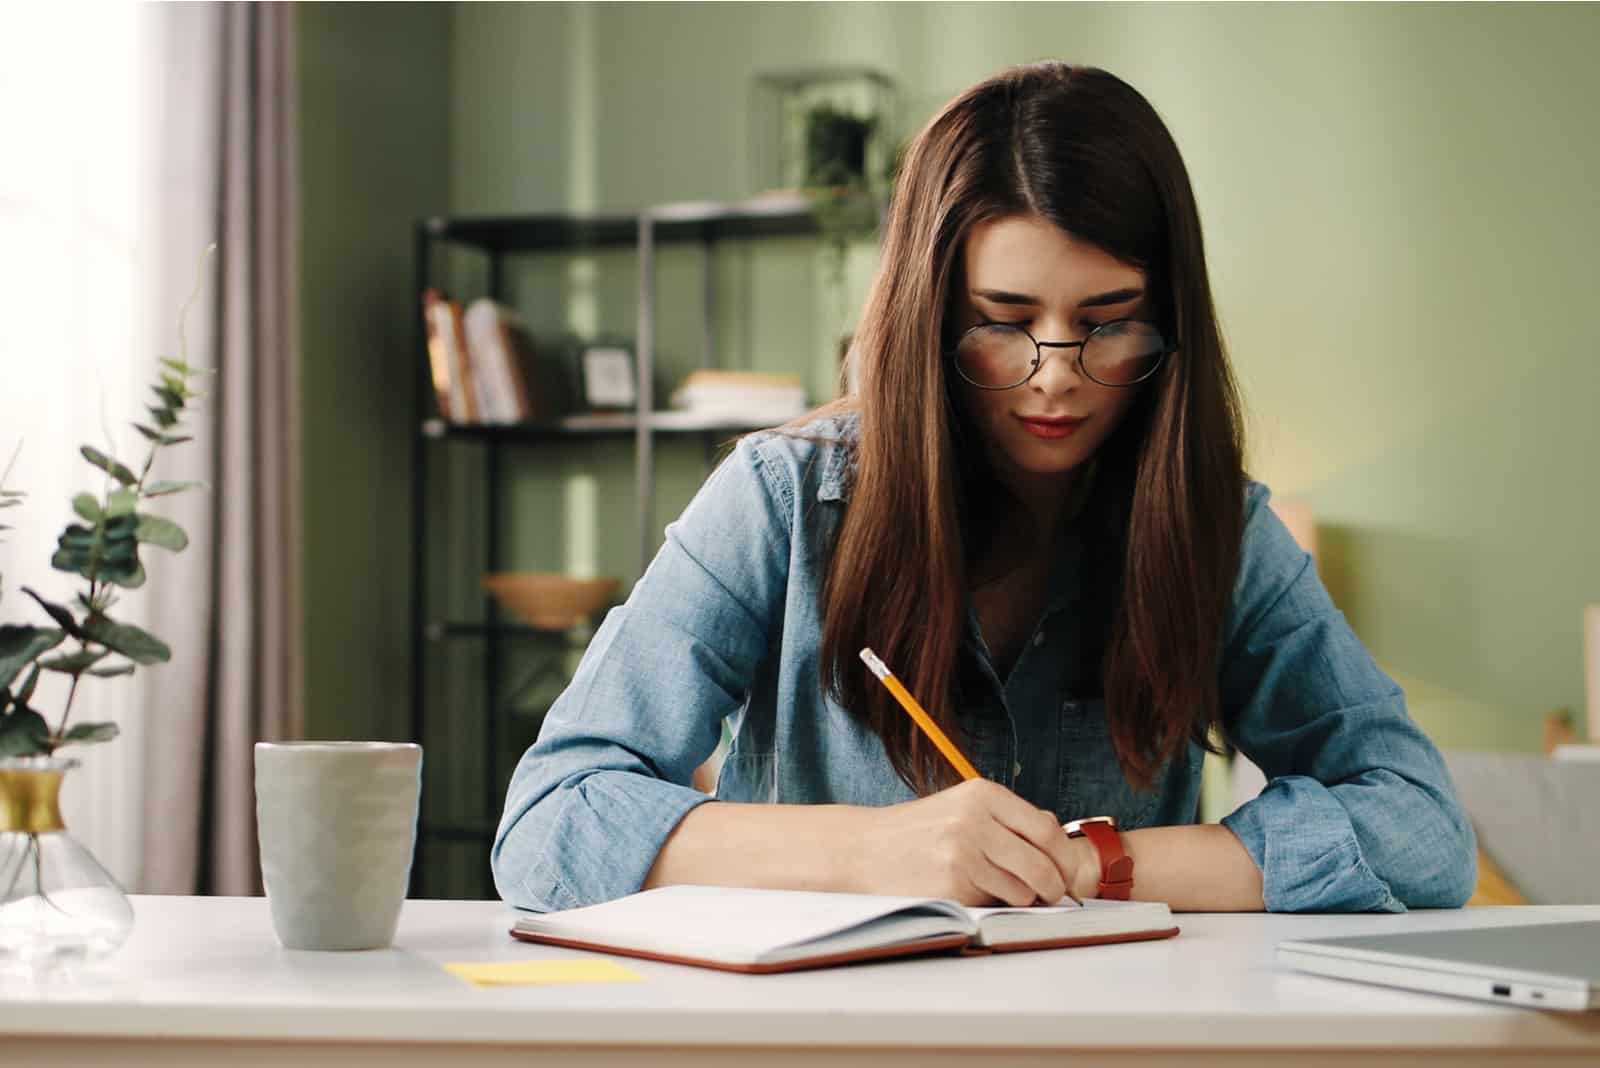 a woman with long brown hair sits at a table and writes